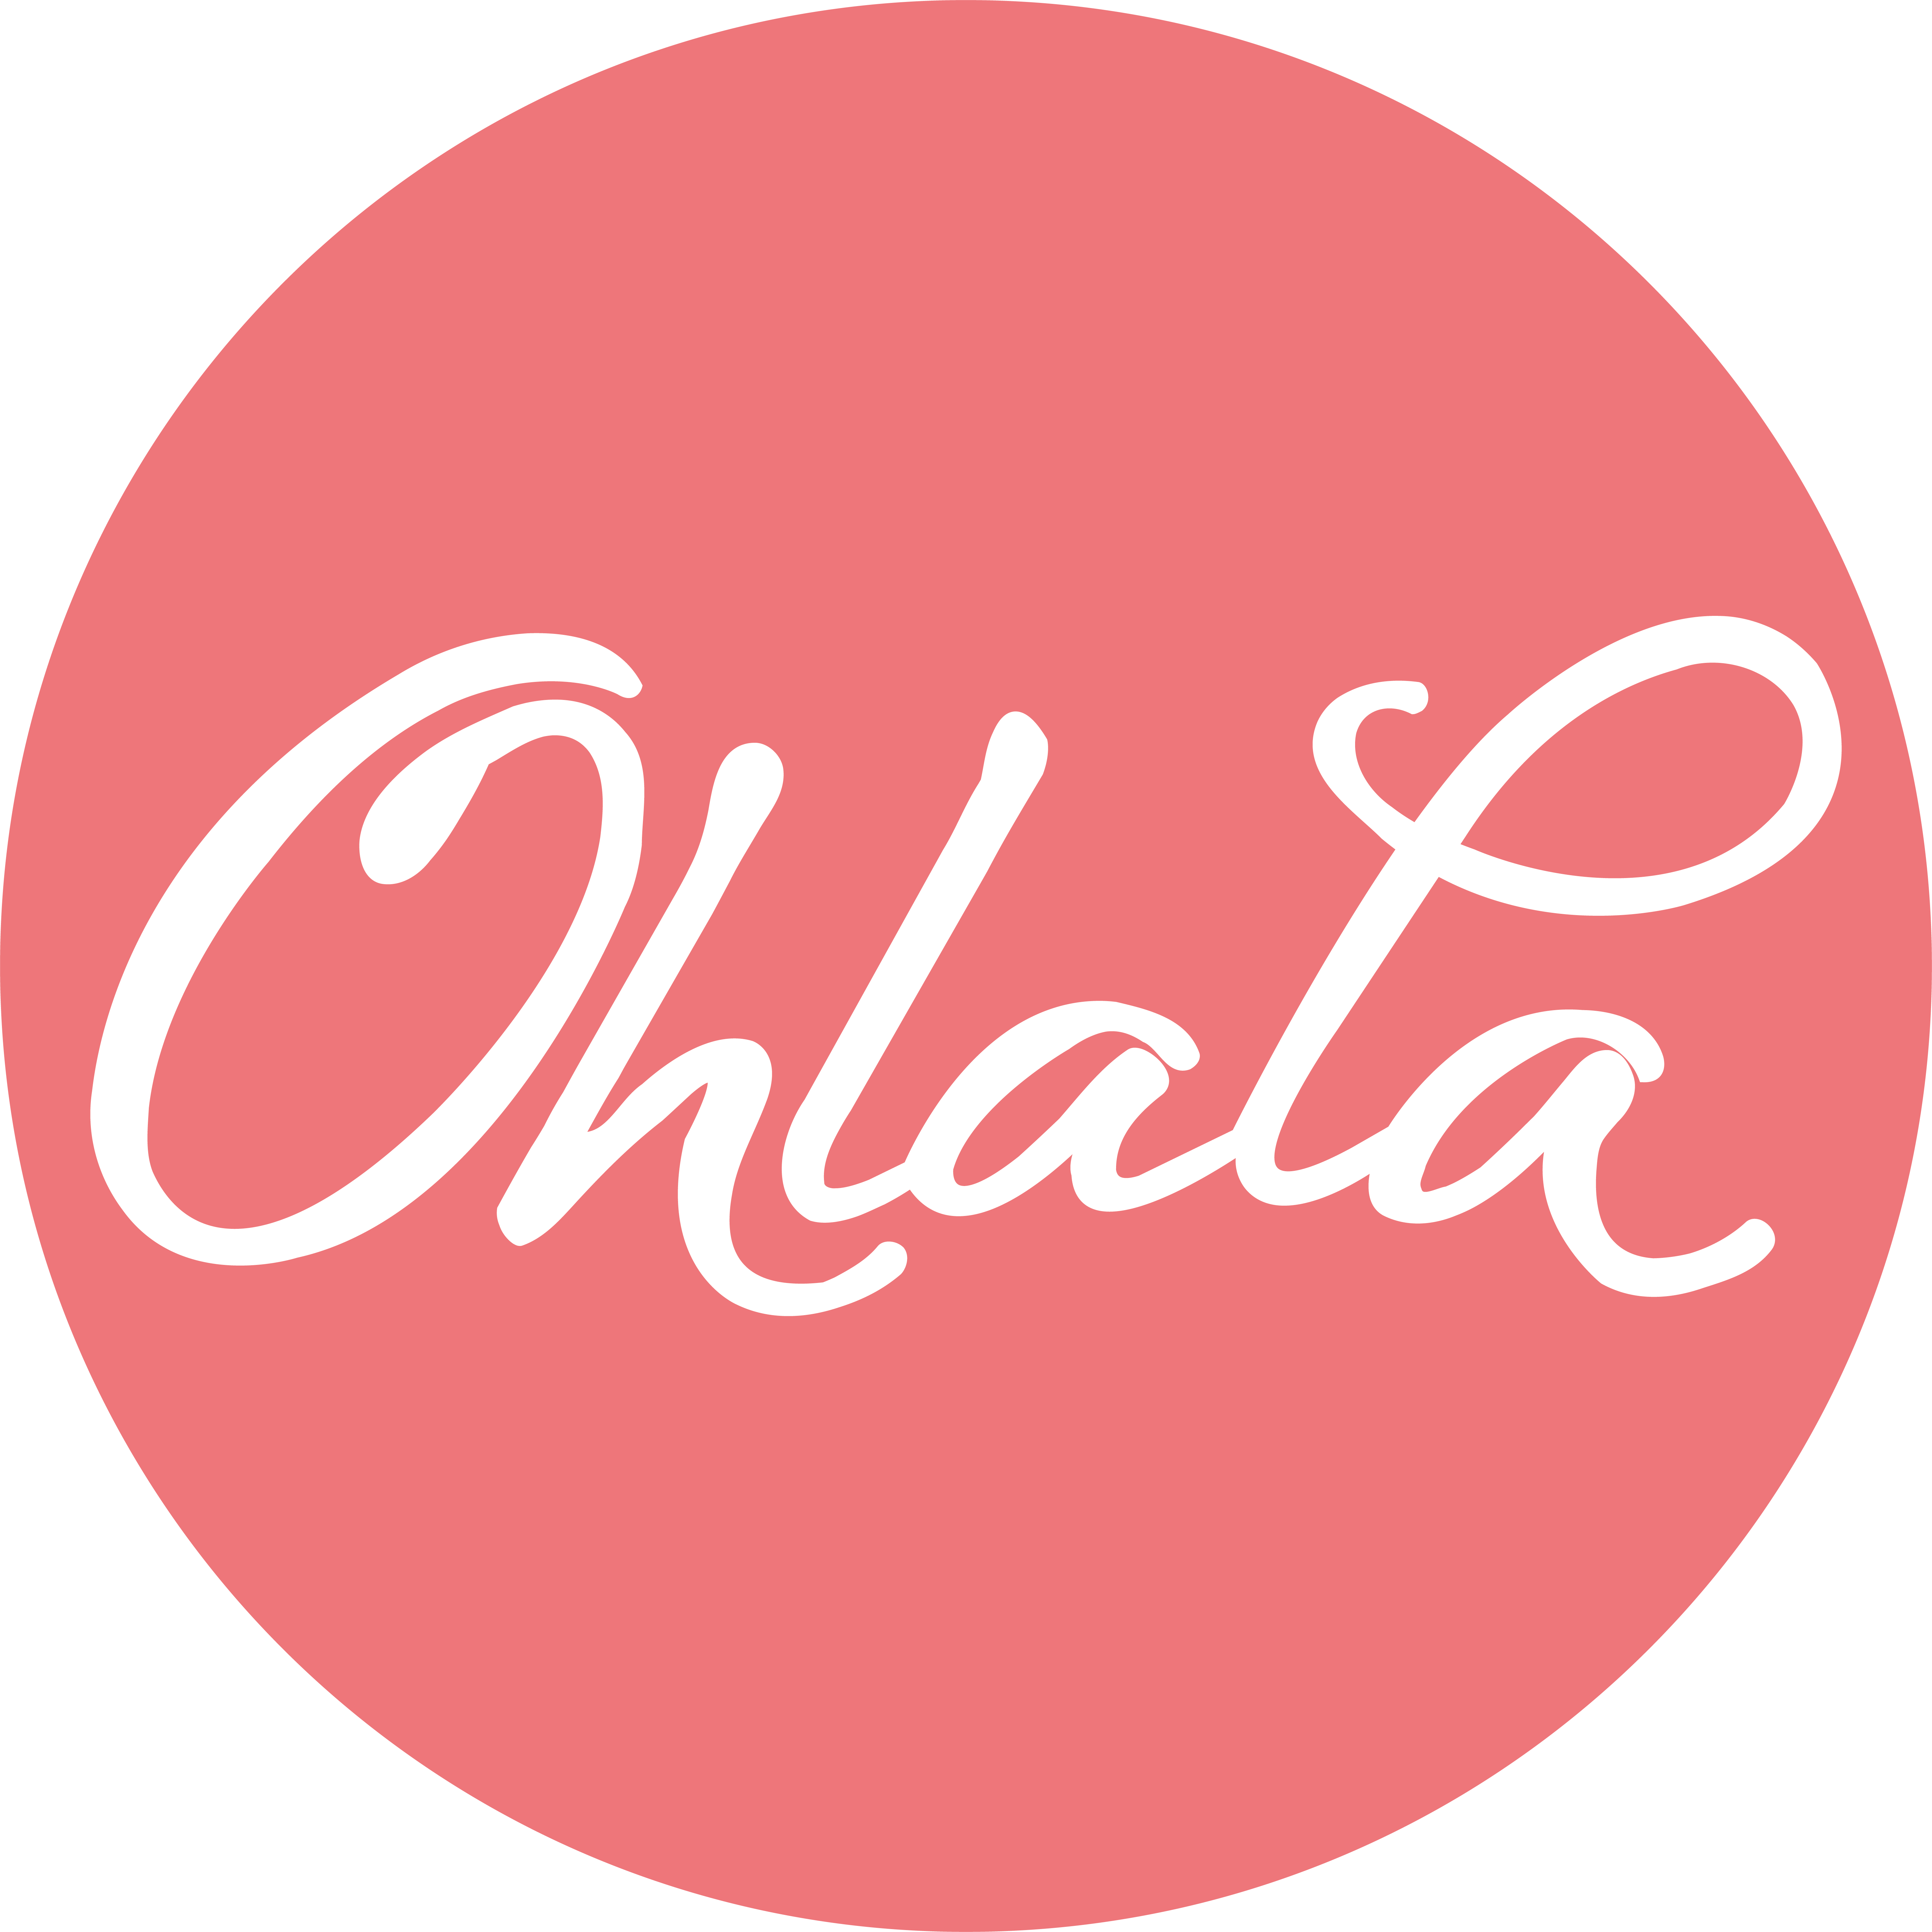 Ohlala Dating Site